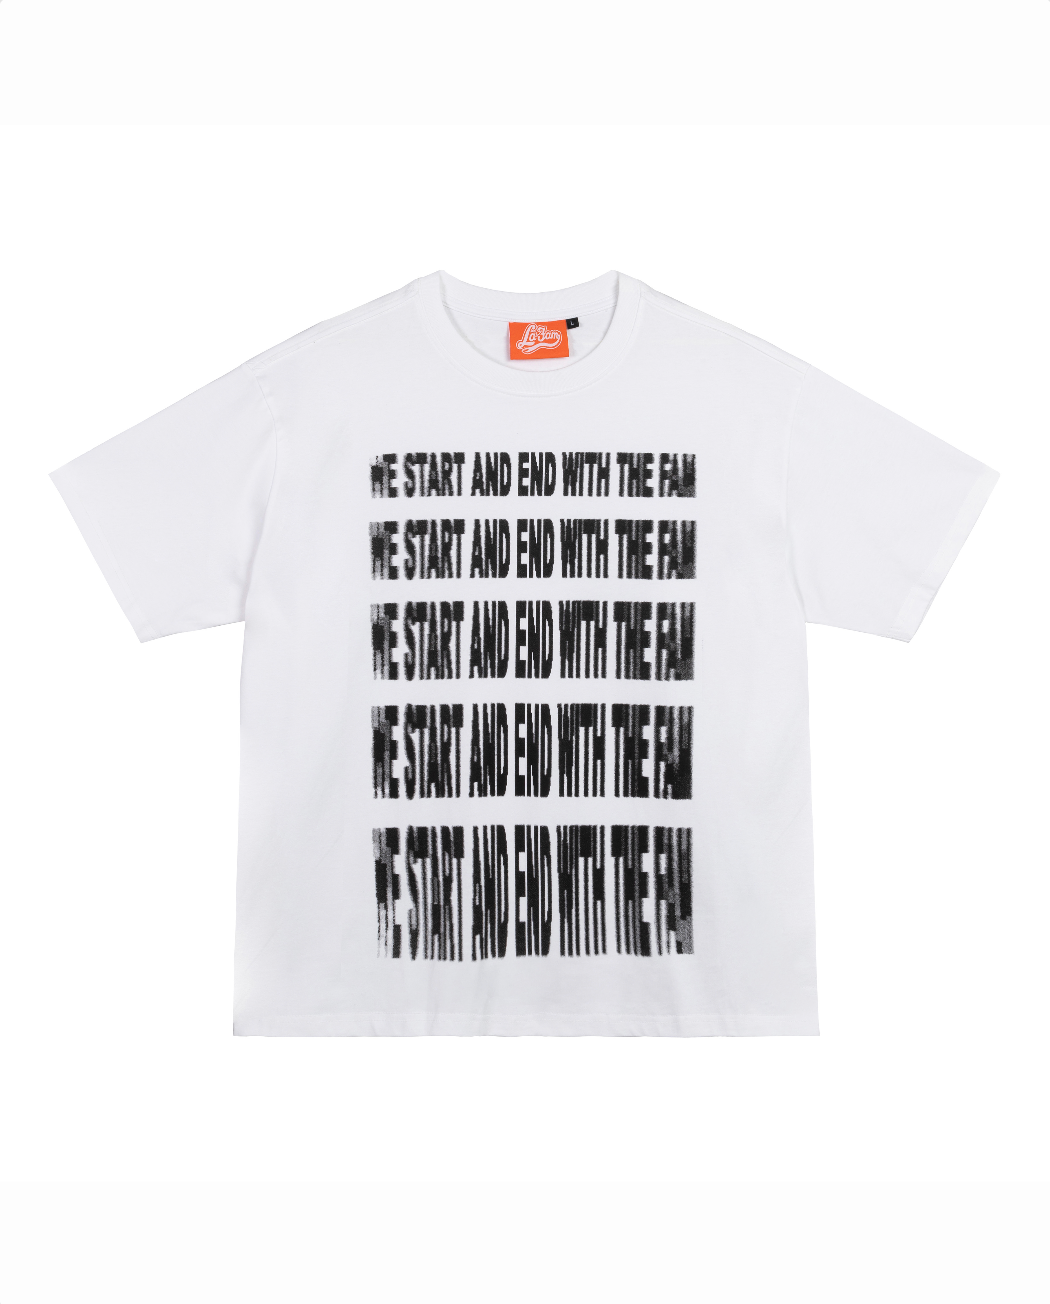 DISTORTED WE START AND END WITH THE FAM TEE